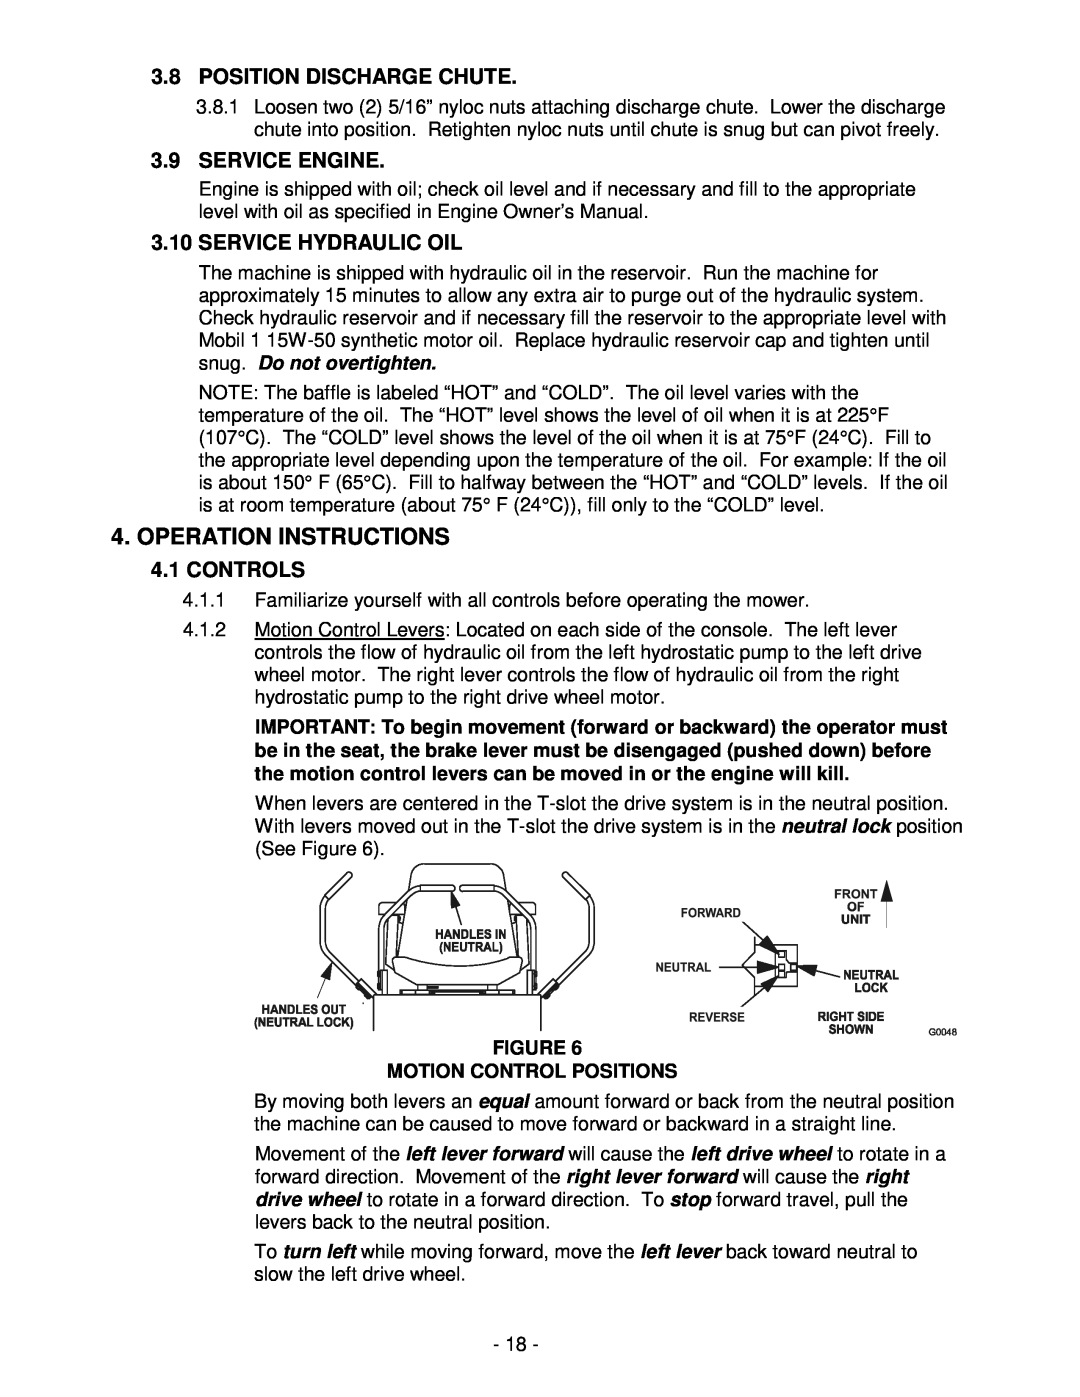 Exmark Lawn Tractor Operation Instructions, Position Discharge Chute, Service Engine, Service Hydraulic Oil, Controls 